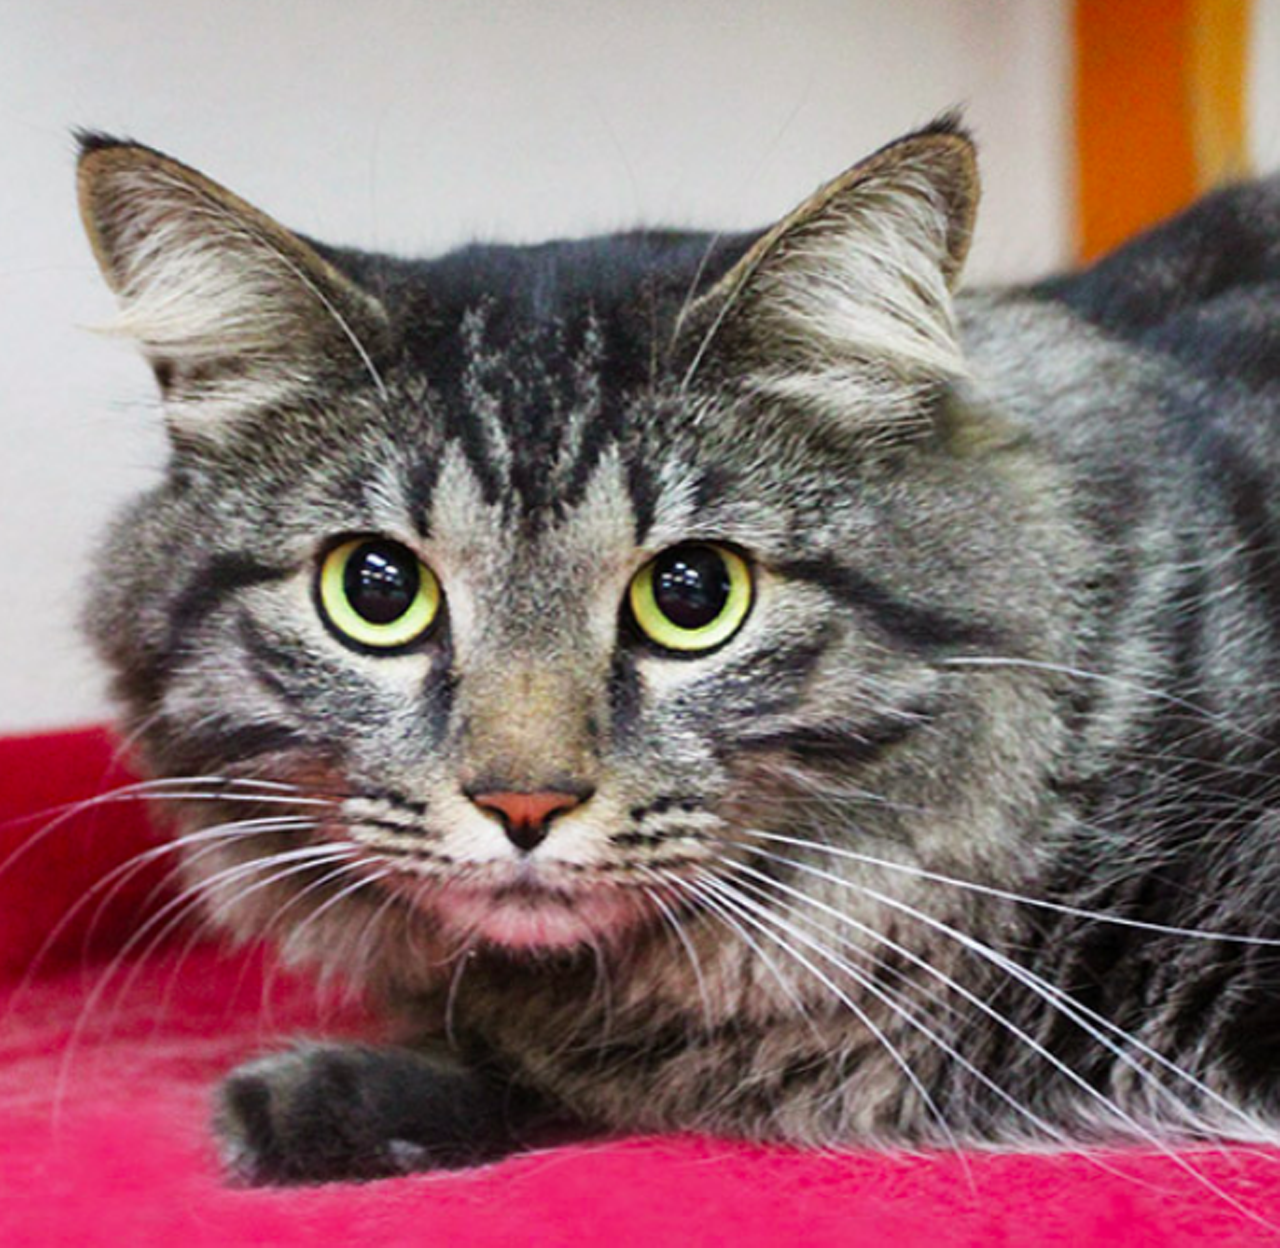 Tobie
"Tobie could be a girl or boy name and I’m a boy. I’m not a web-slinging action hero like Tobey Maguire but I’m willing to be your friendly forever home cat. Don’t walk, don’t run…swing in to meet me!"